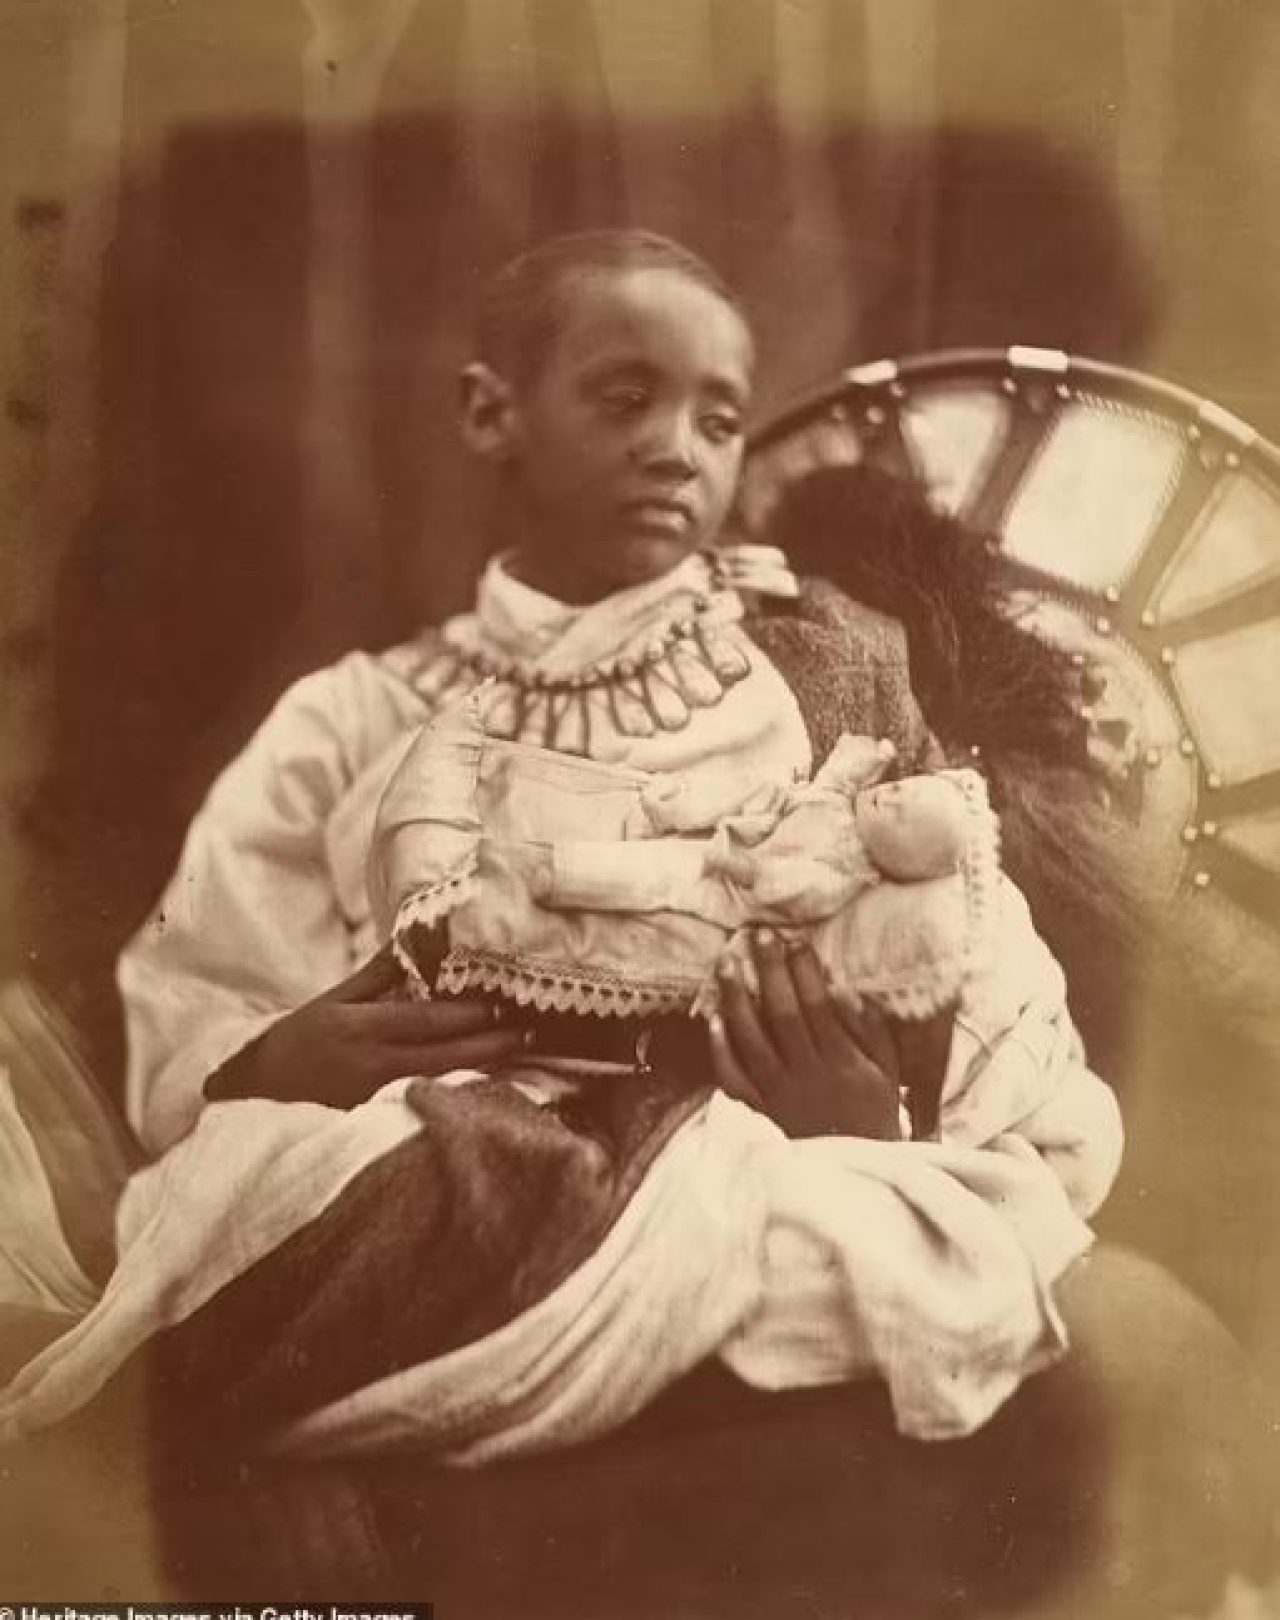 Buckingham Palace declines to return remains of Ethiopian prince. AdvertAfrica News on afronewswire.com: Amplifying Africa's Voice | afronewswire.com | Breaking News & Stories